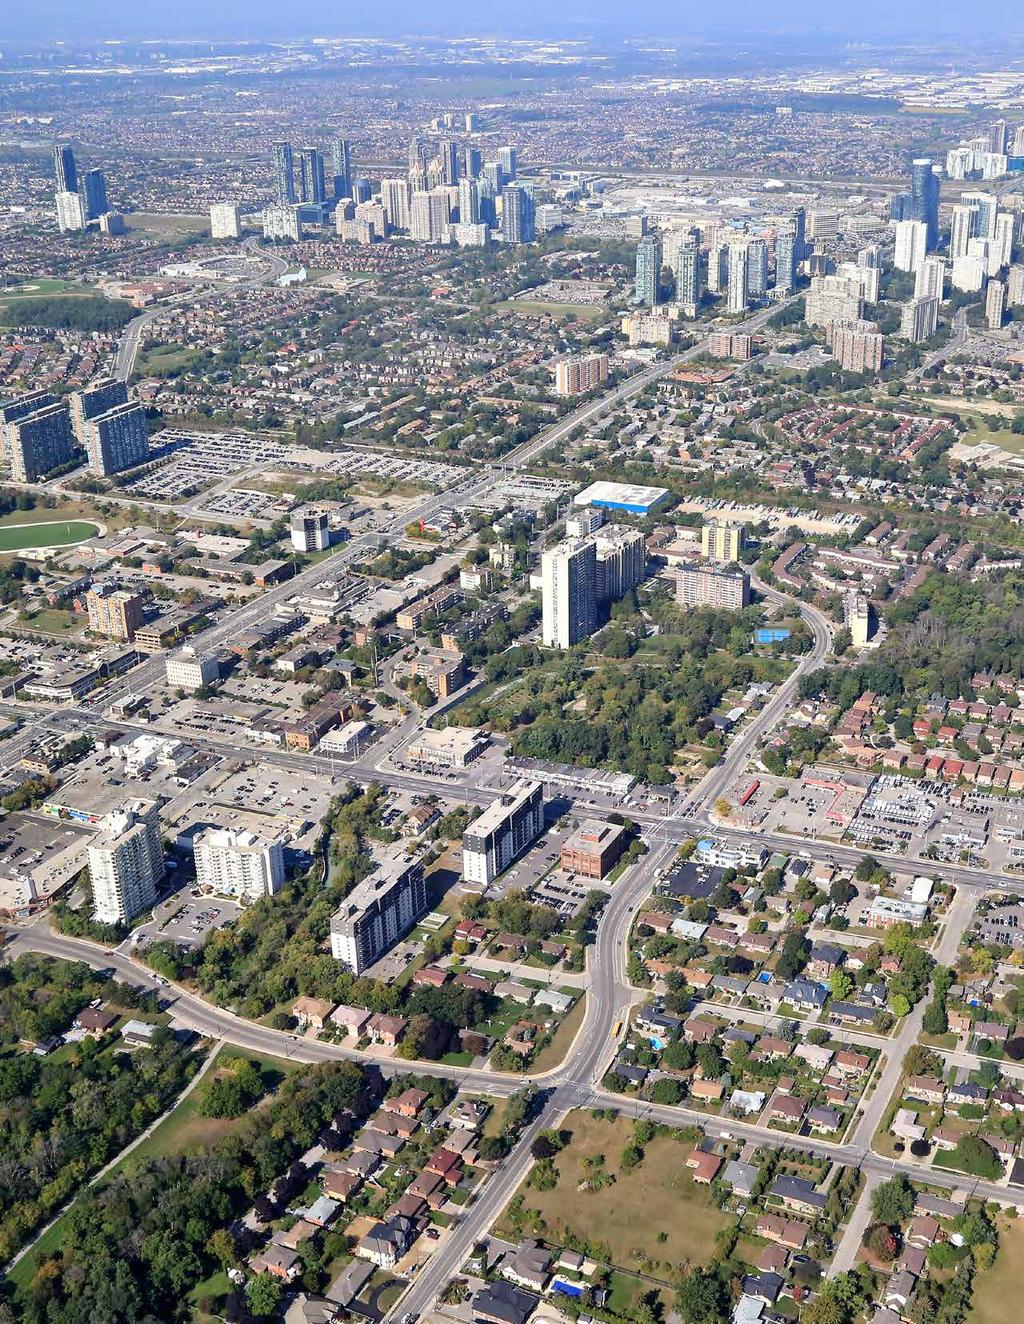 The future LRT will serve stops along the Hurontario Corridor, with intermunicipal connections to GO Transit Lines, Mississauga MiWay, Brampton Züm and Mississauga Transitway BRT.